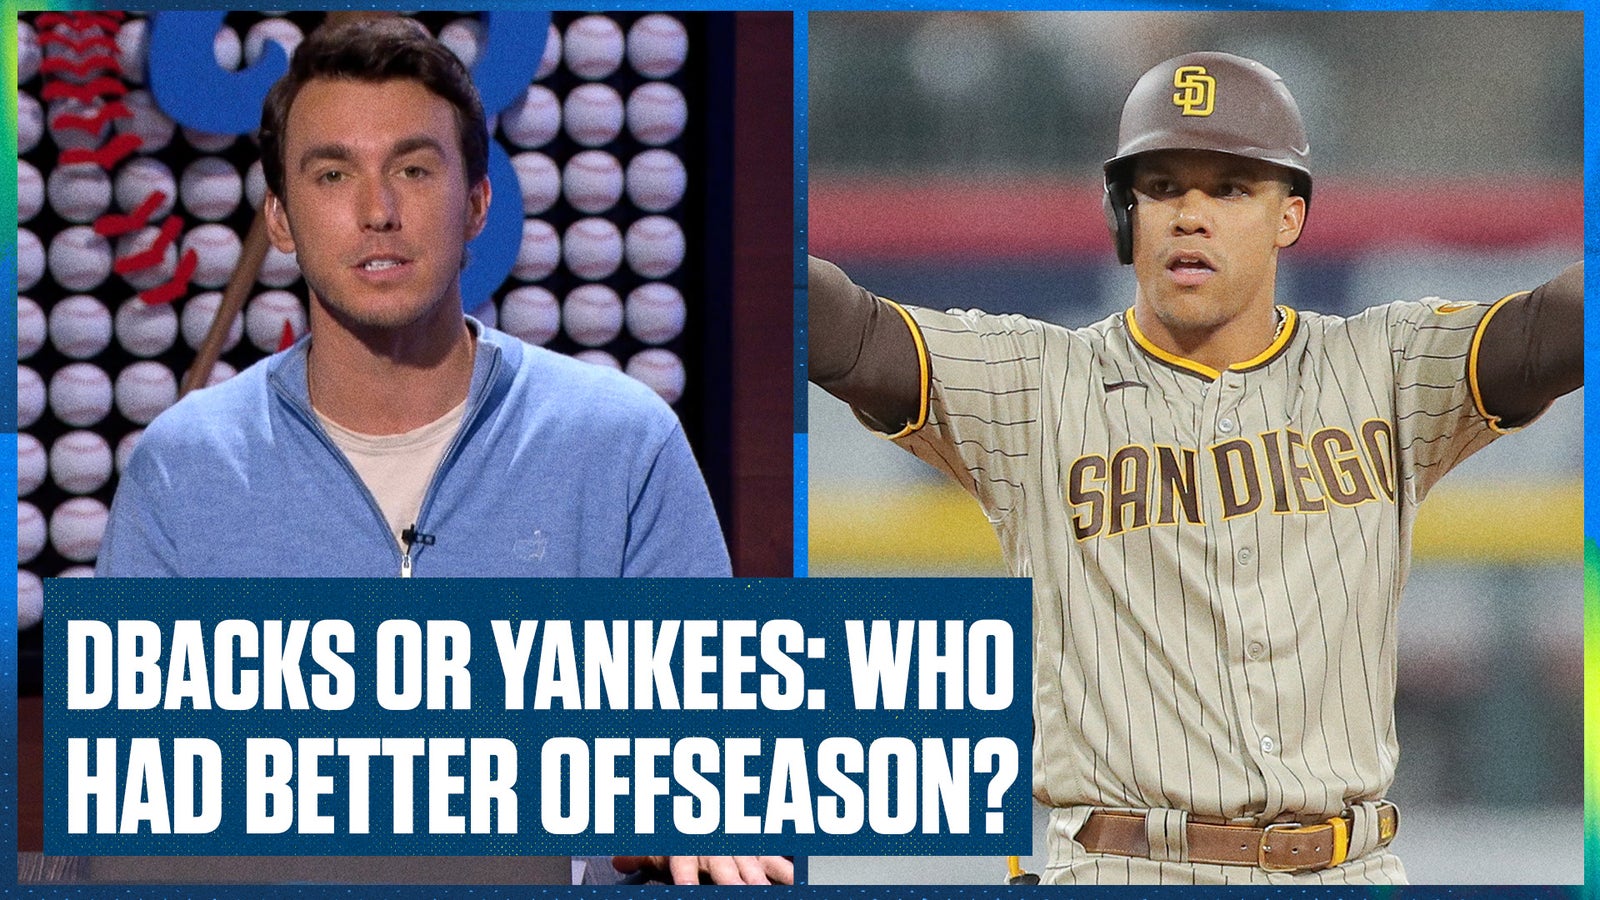 D-backs vs. Yankees: Who's had the best offseason after Dodgers?